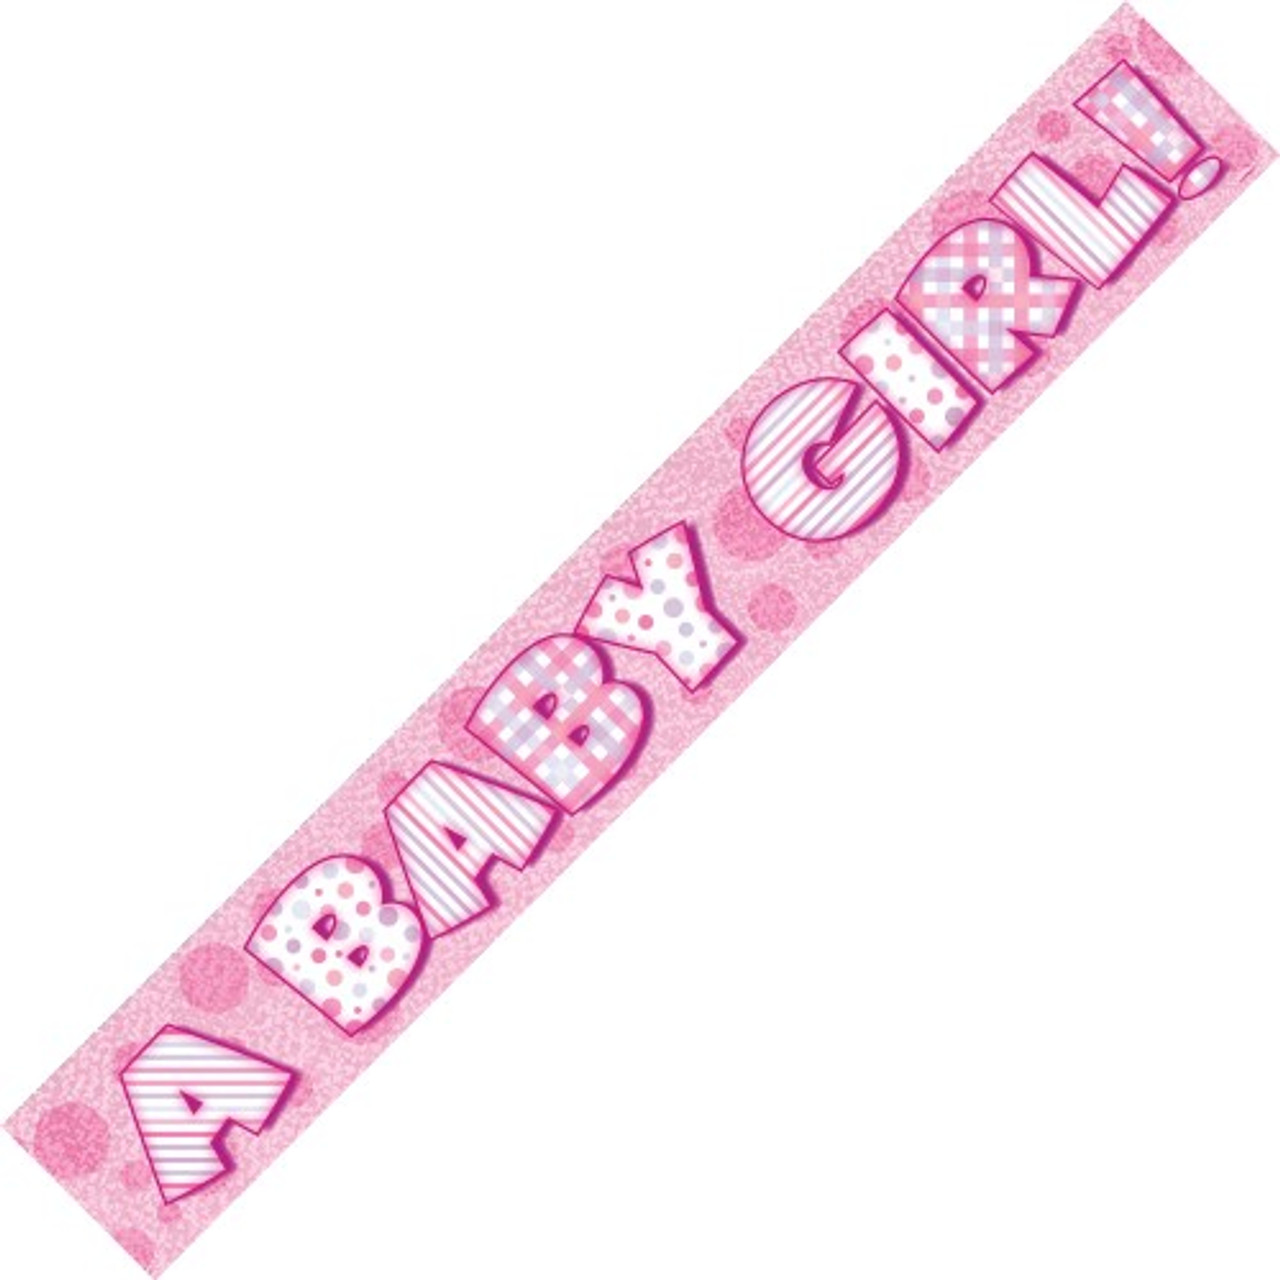 10876- A BABY GIRL PRISMATIC  BANNER 3.6M